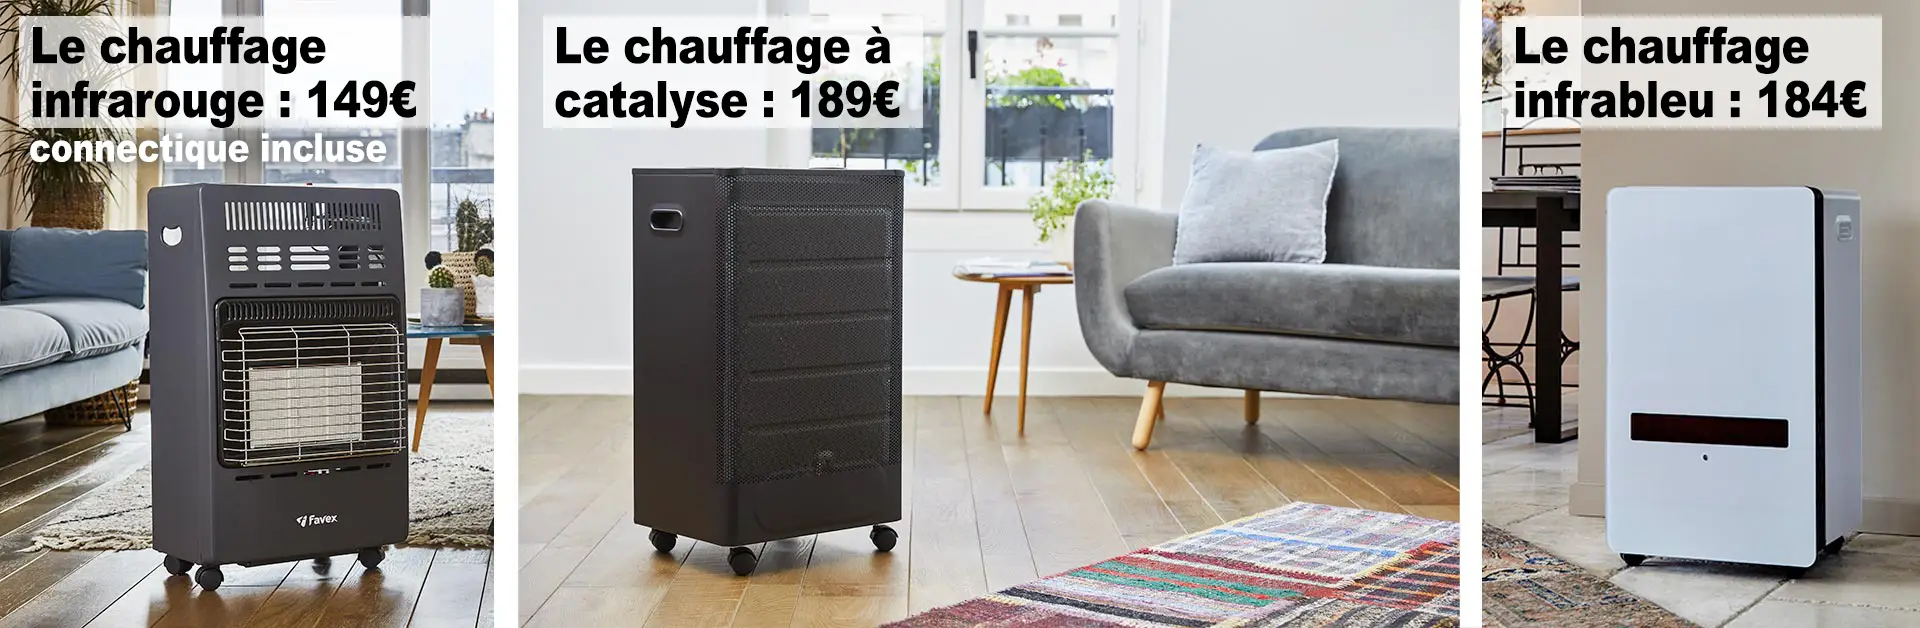 Chauffage d'appoint Favex  Infrarouge, Catalyse, Infrableu